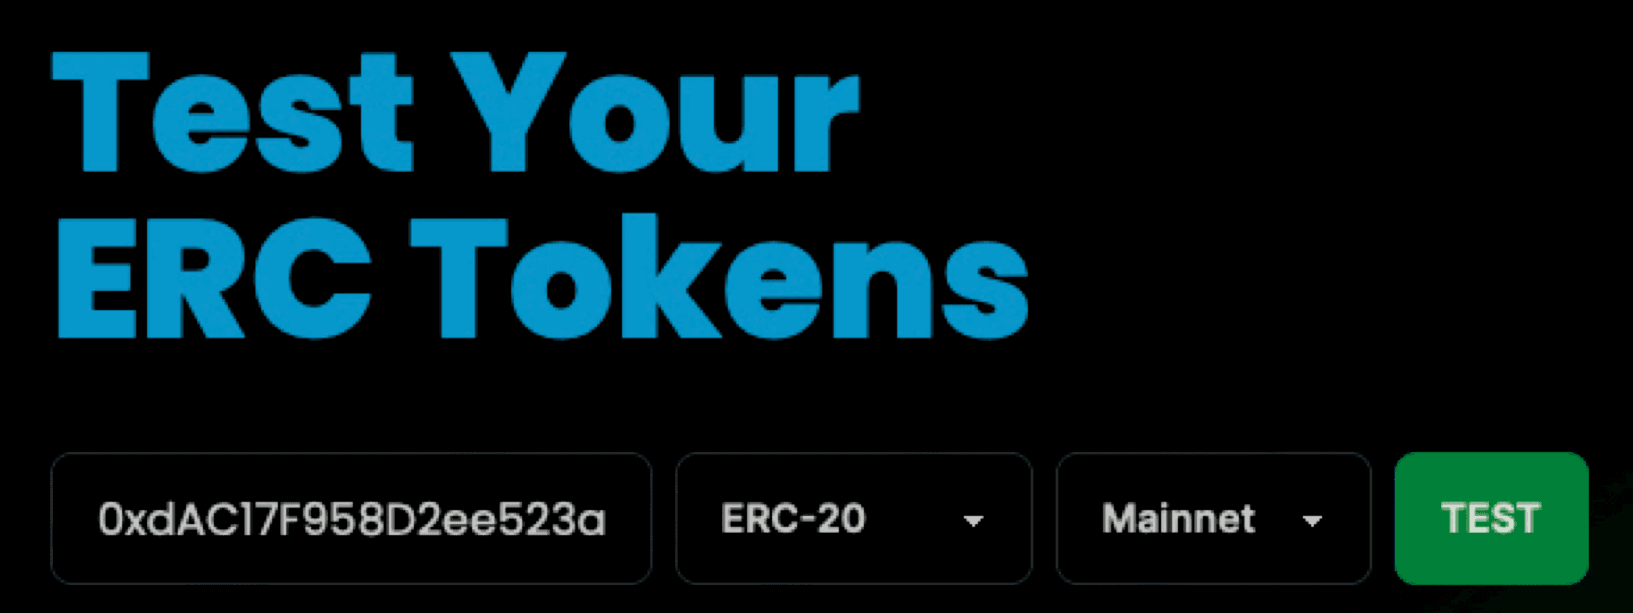 Test Your ERC Tokens